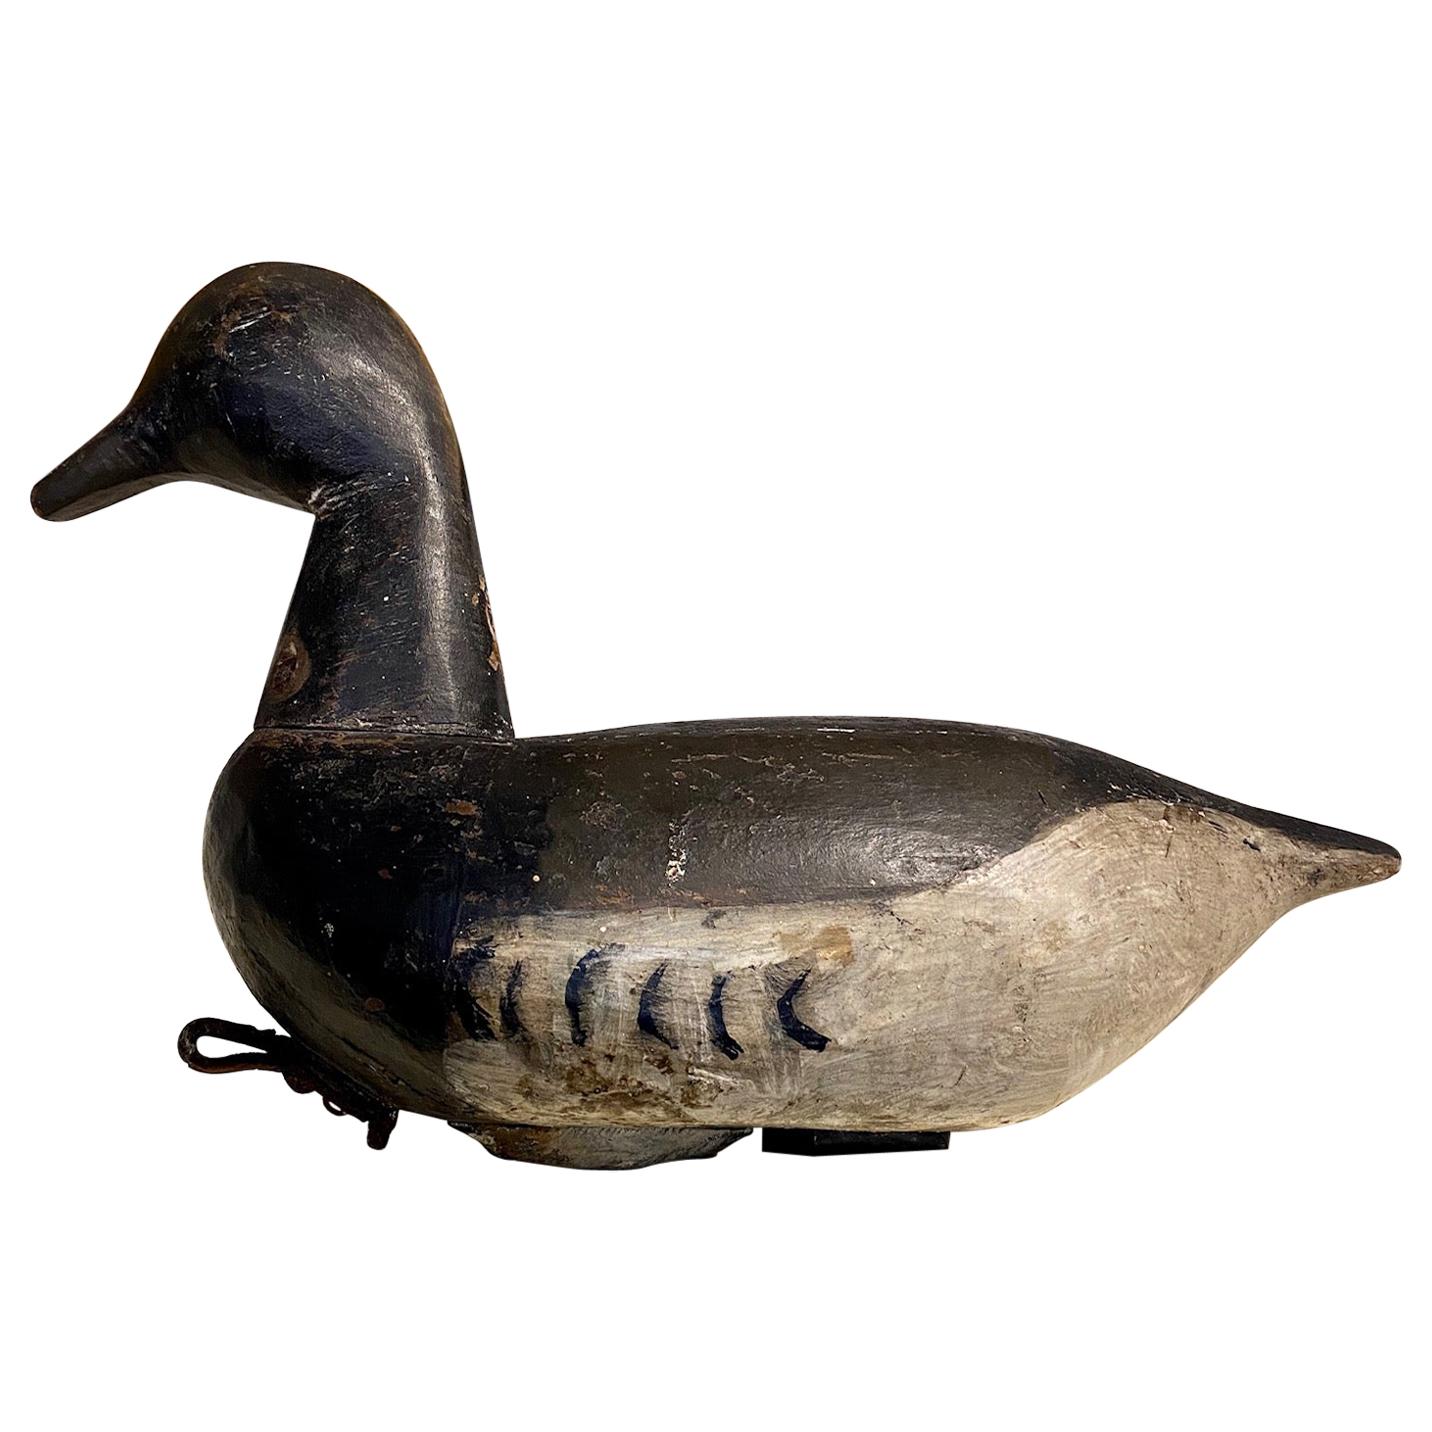 Long Island Root Head Brant Decoy by the Verity Family, circa 1890